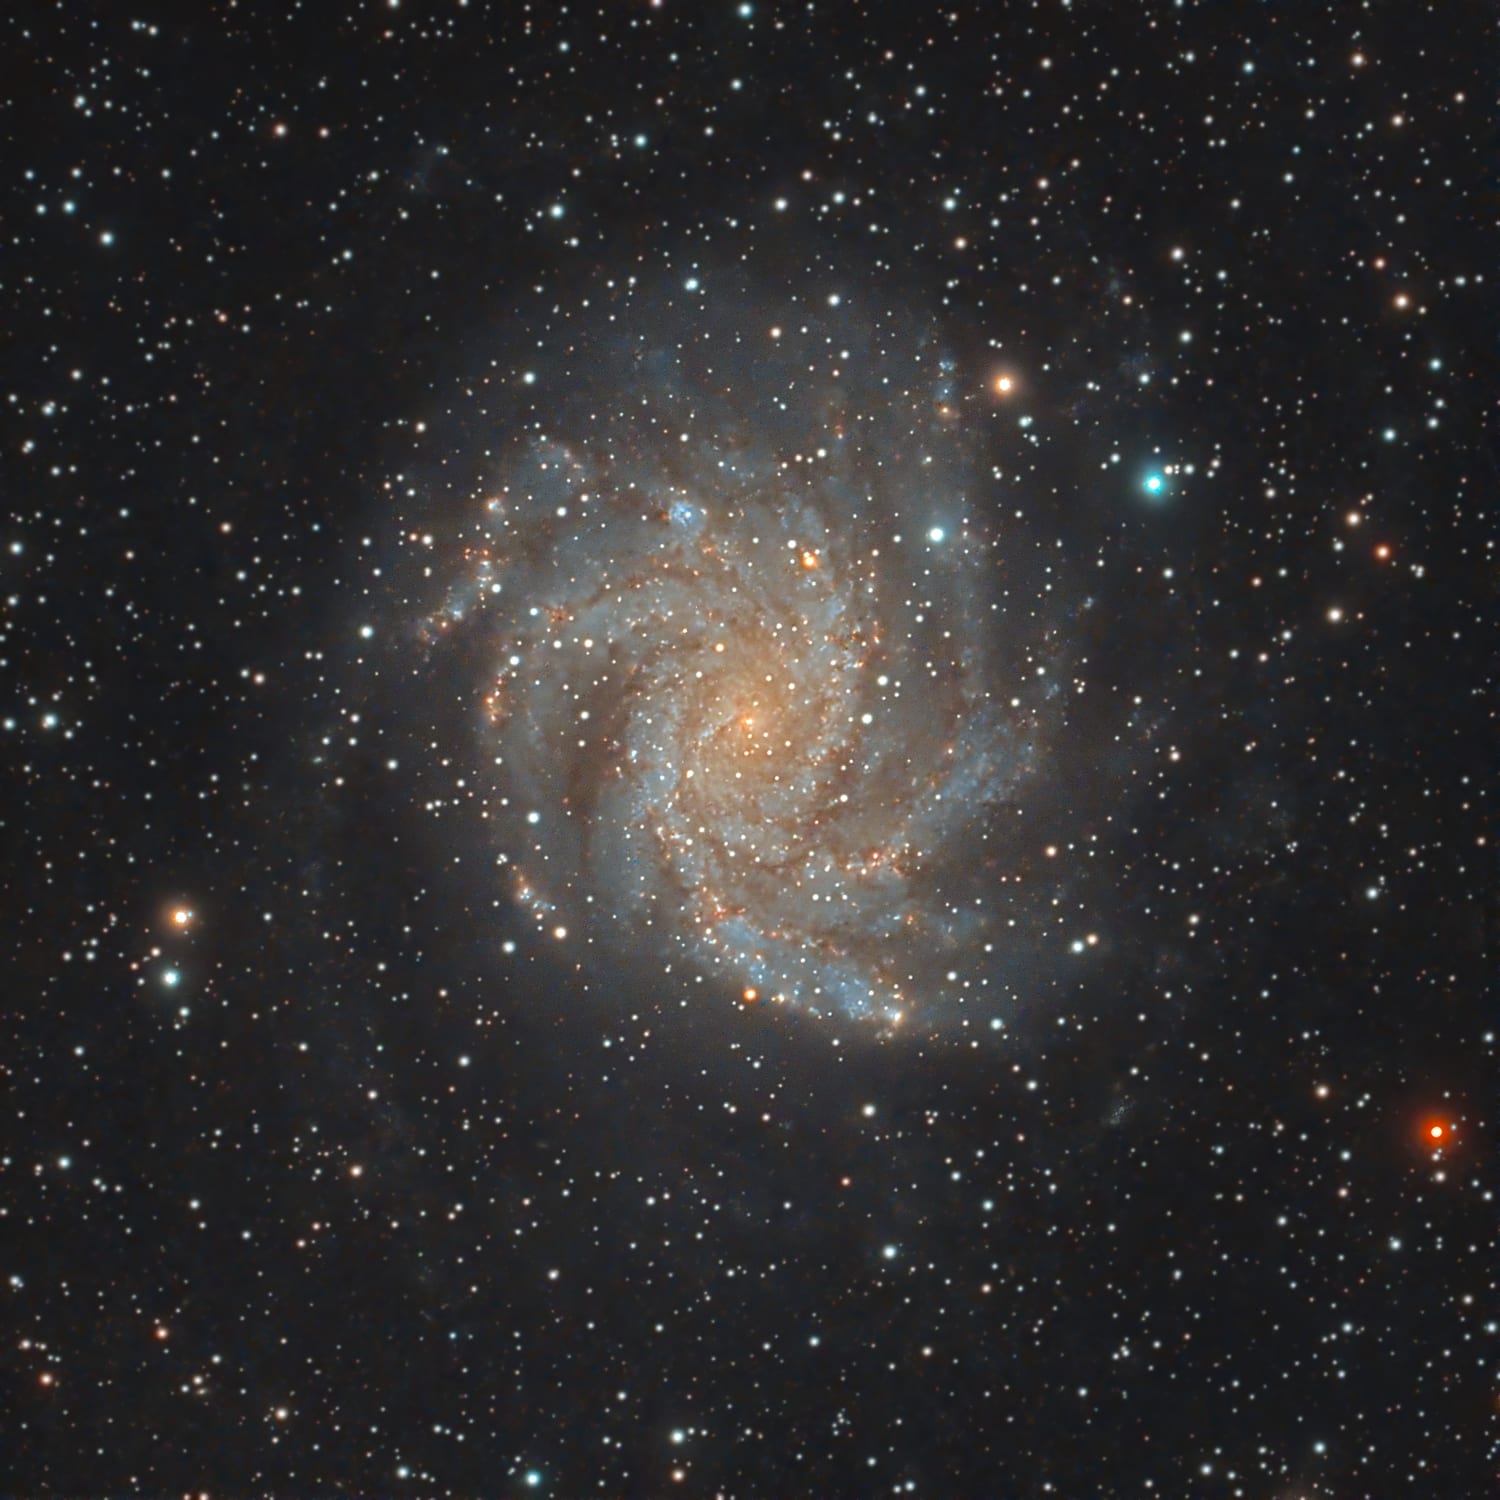 Fireworks Galaxy NGC 6946, with the return of dark skies here in the UK